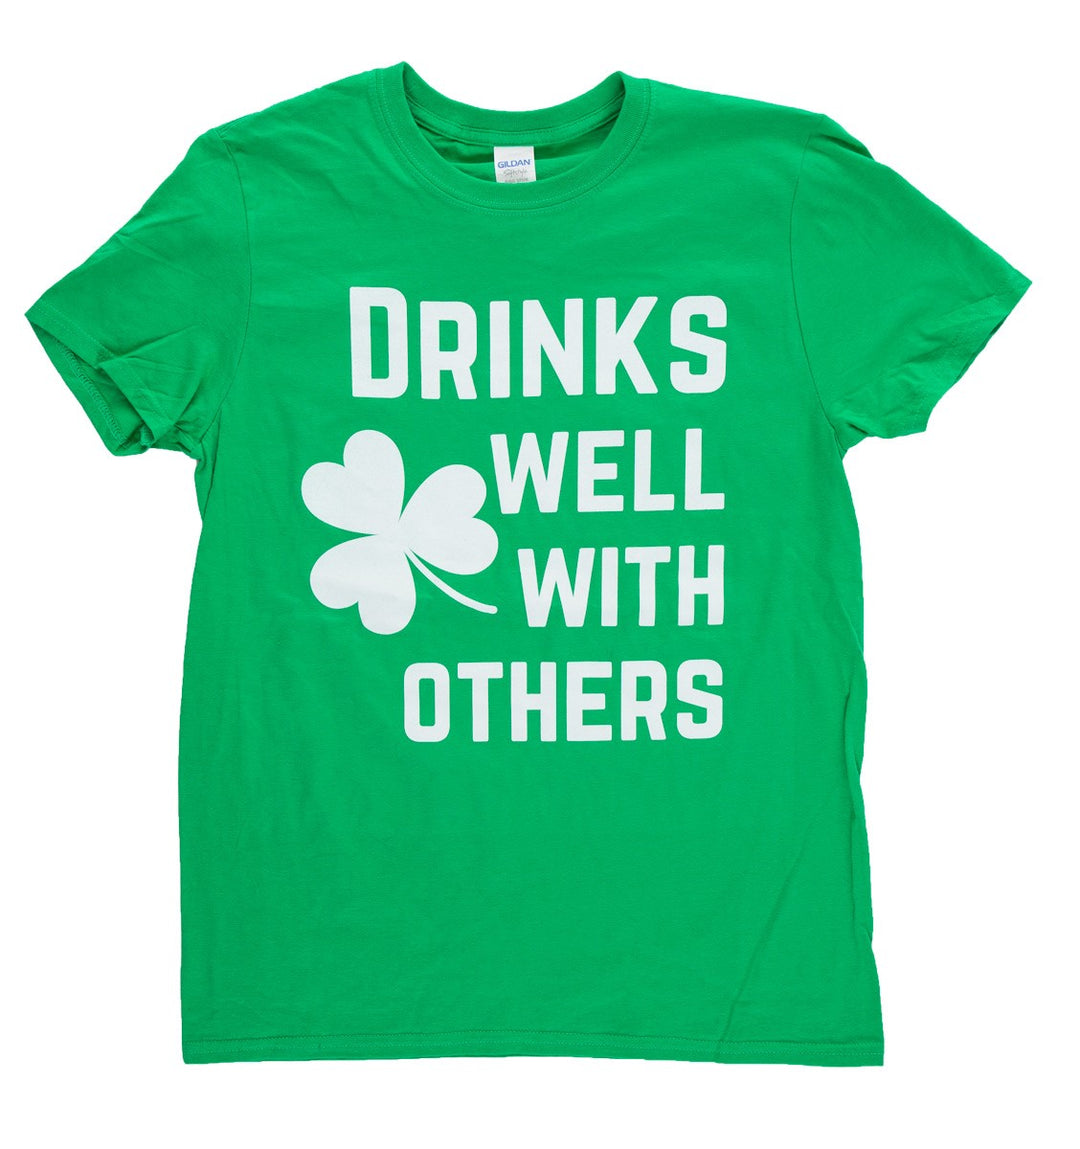 Unisex "Drinks Well With Others" T-Shirt